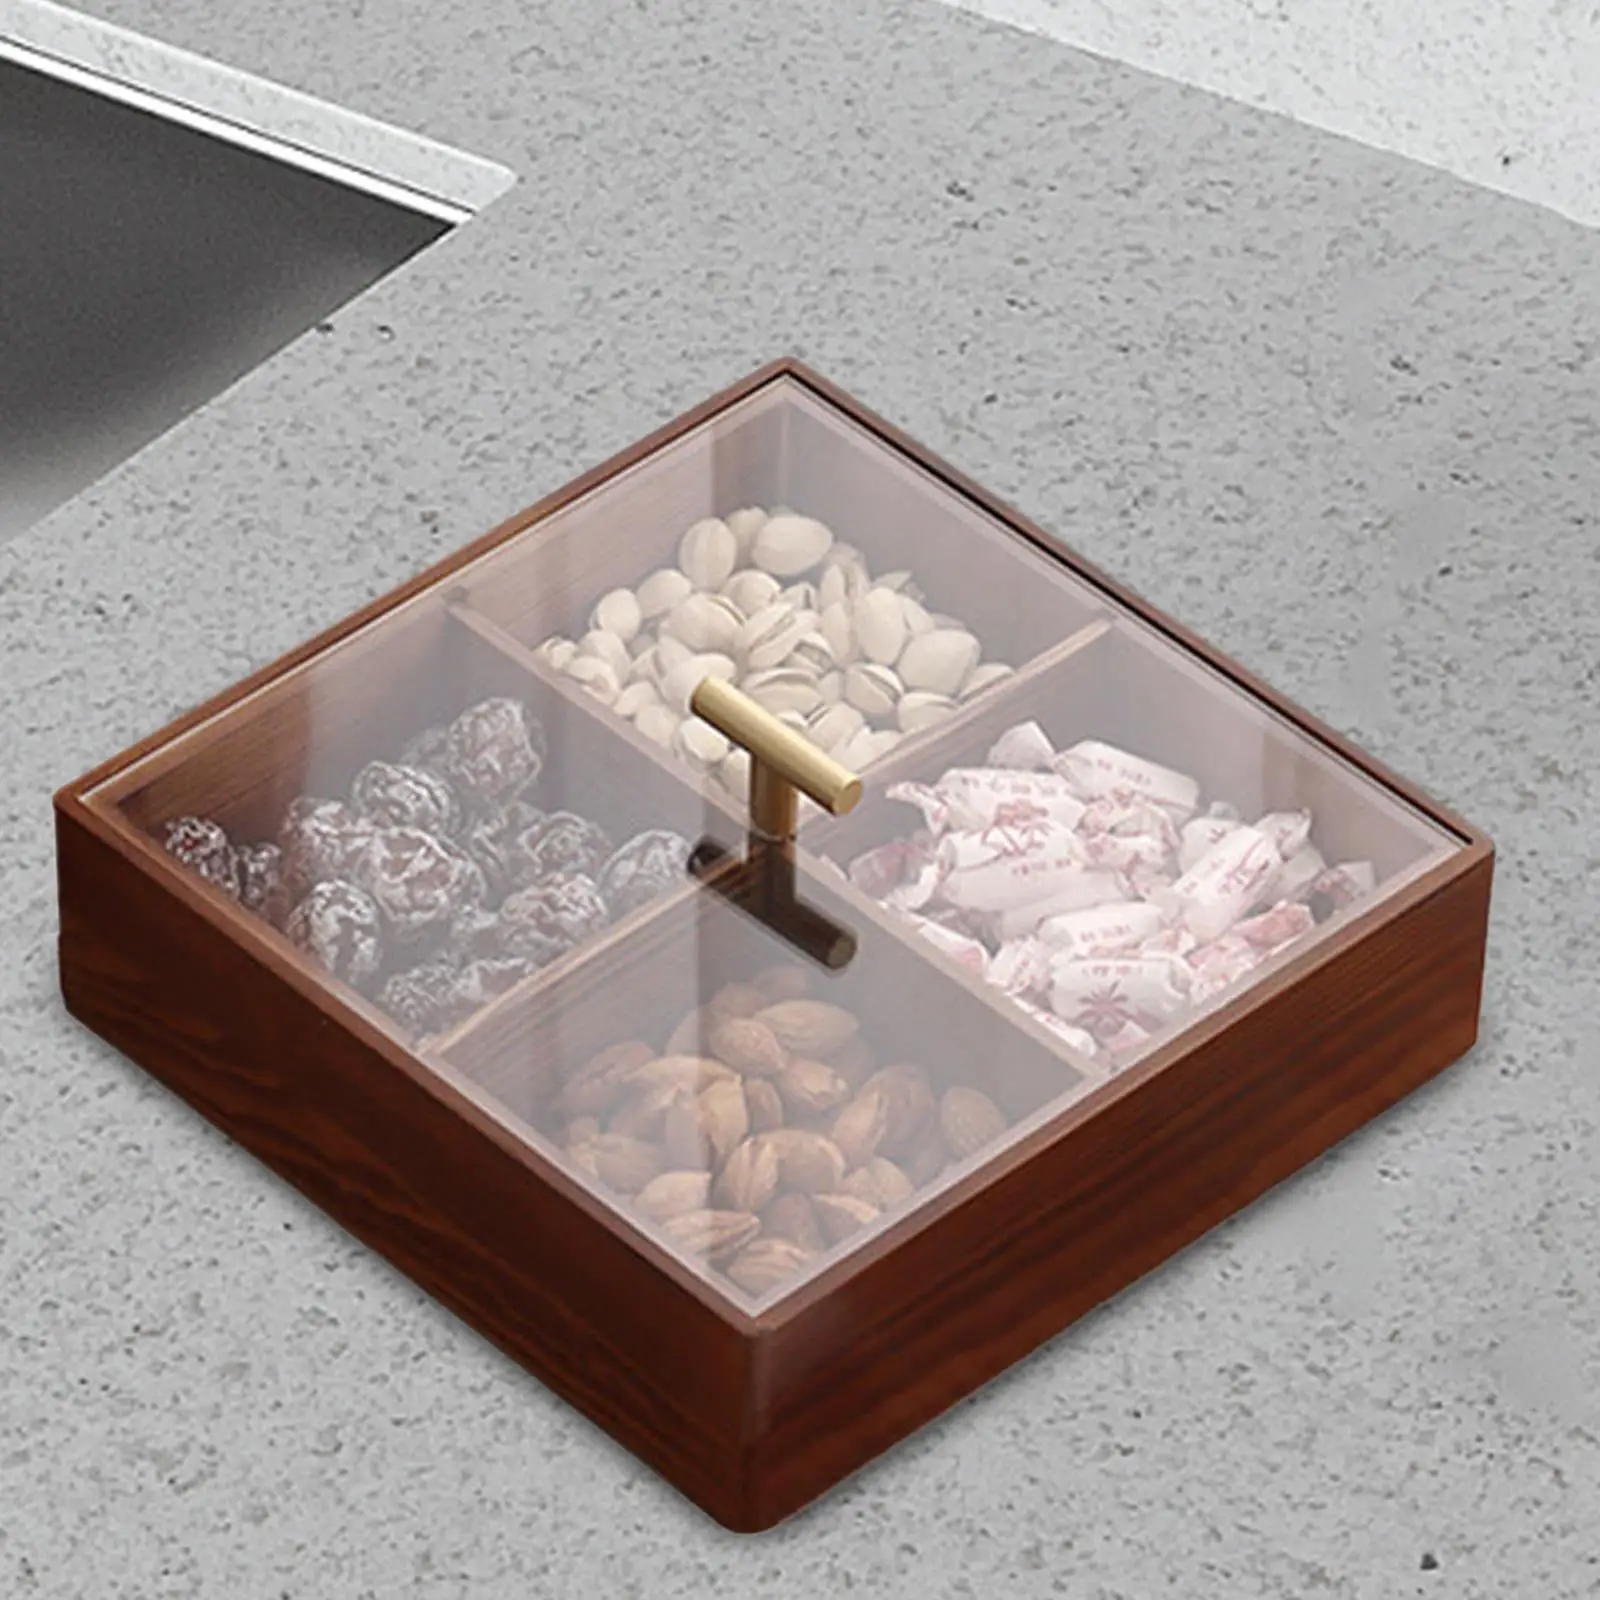 Divided Serving Tray with Lid Party Multipurpose Home Decor Candy Bowl Dried Fruit Tray for Candy Dessert Nuts Sweets Snacks